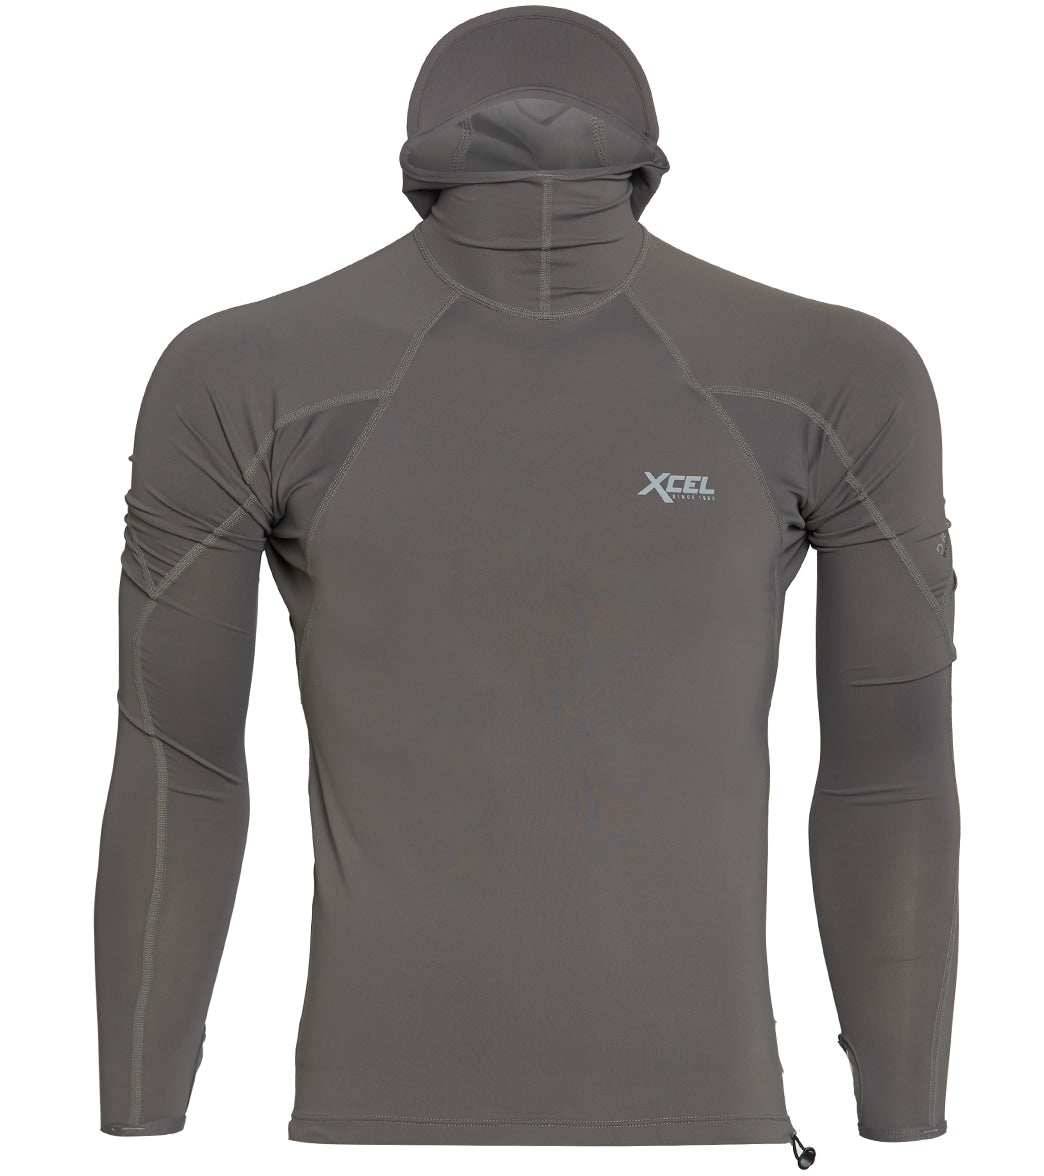 Xcel Sun Protection Clothing at